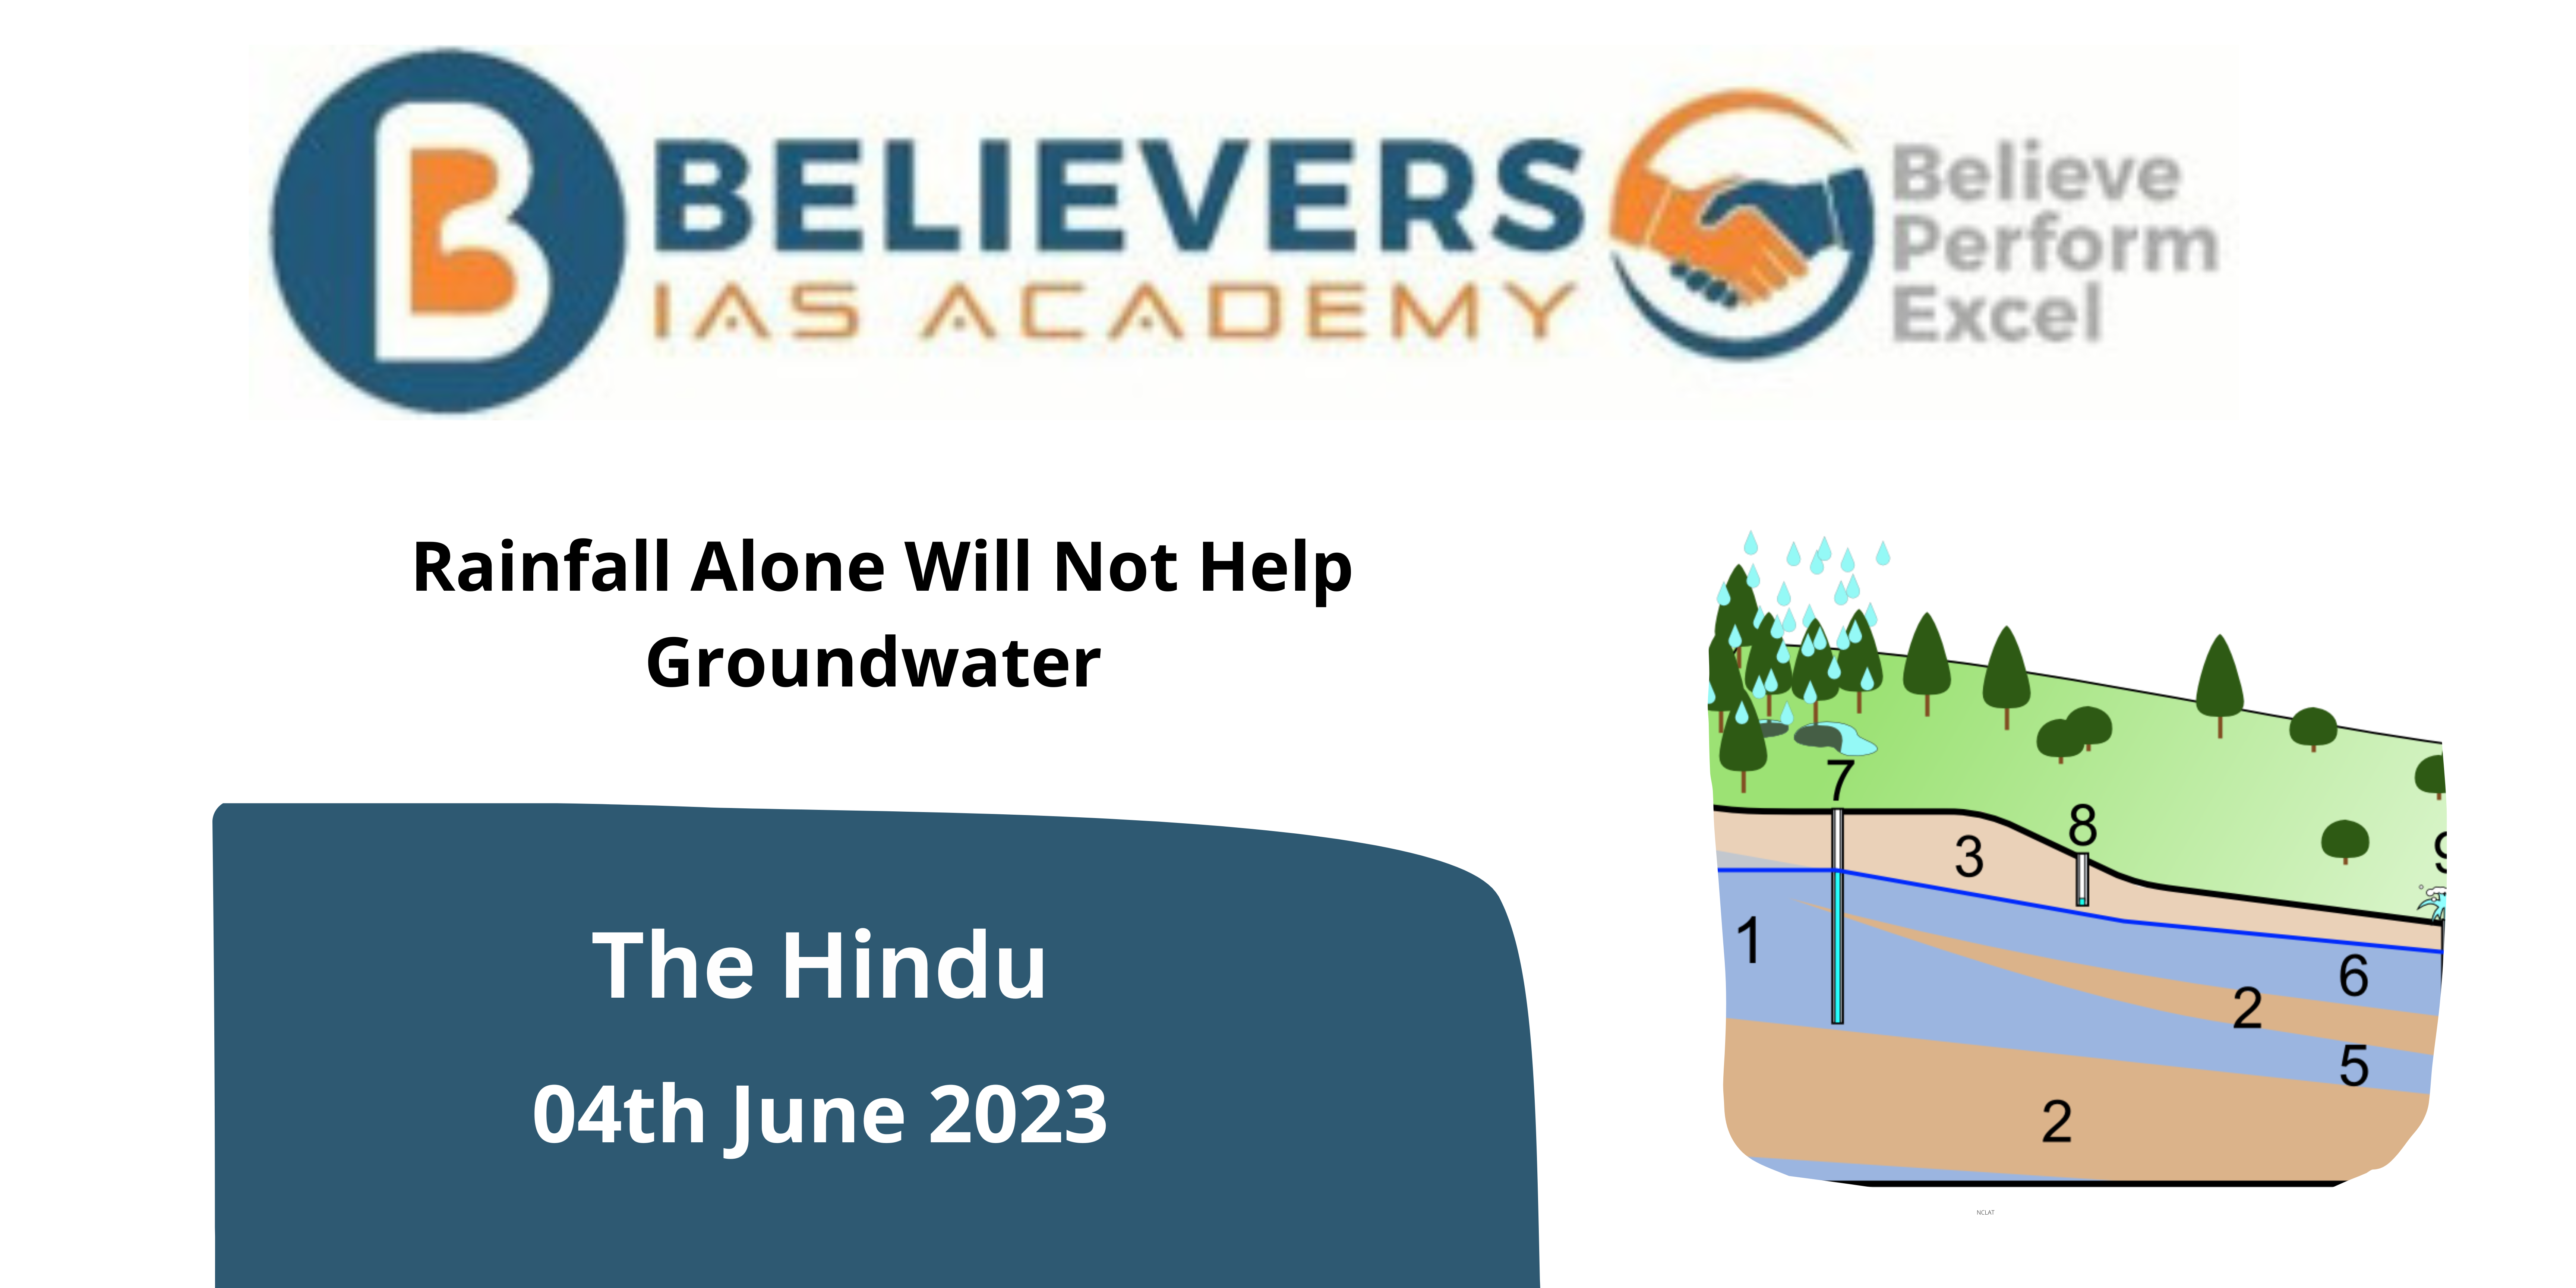 Rainfall Alone Will Not Help Groundwater